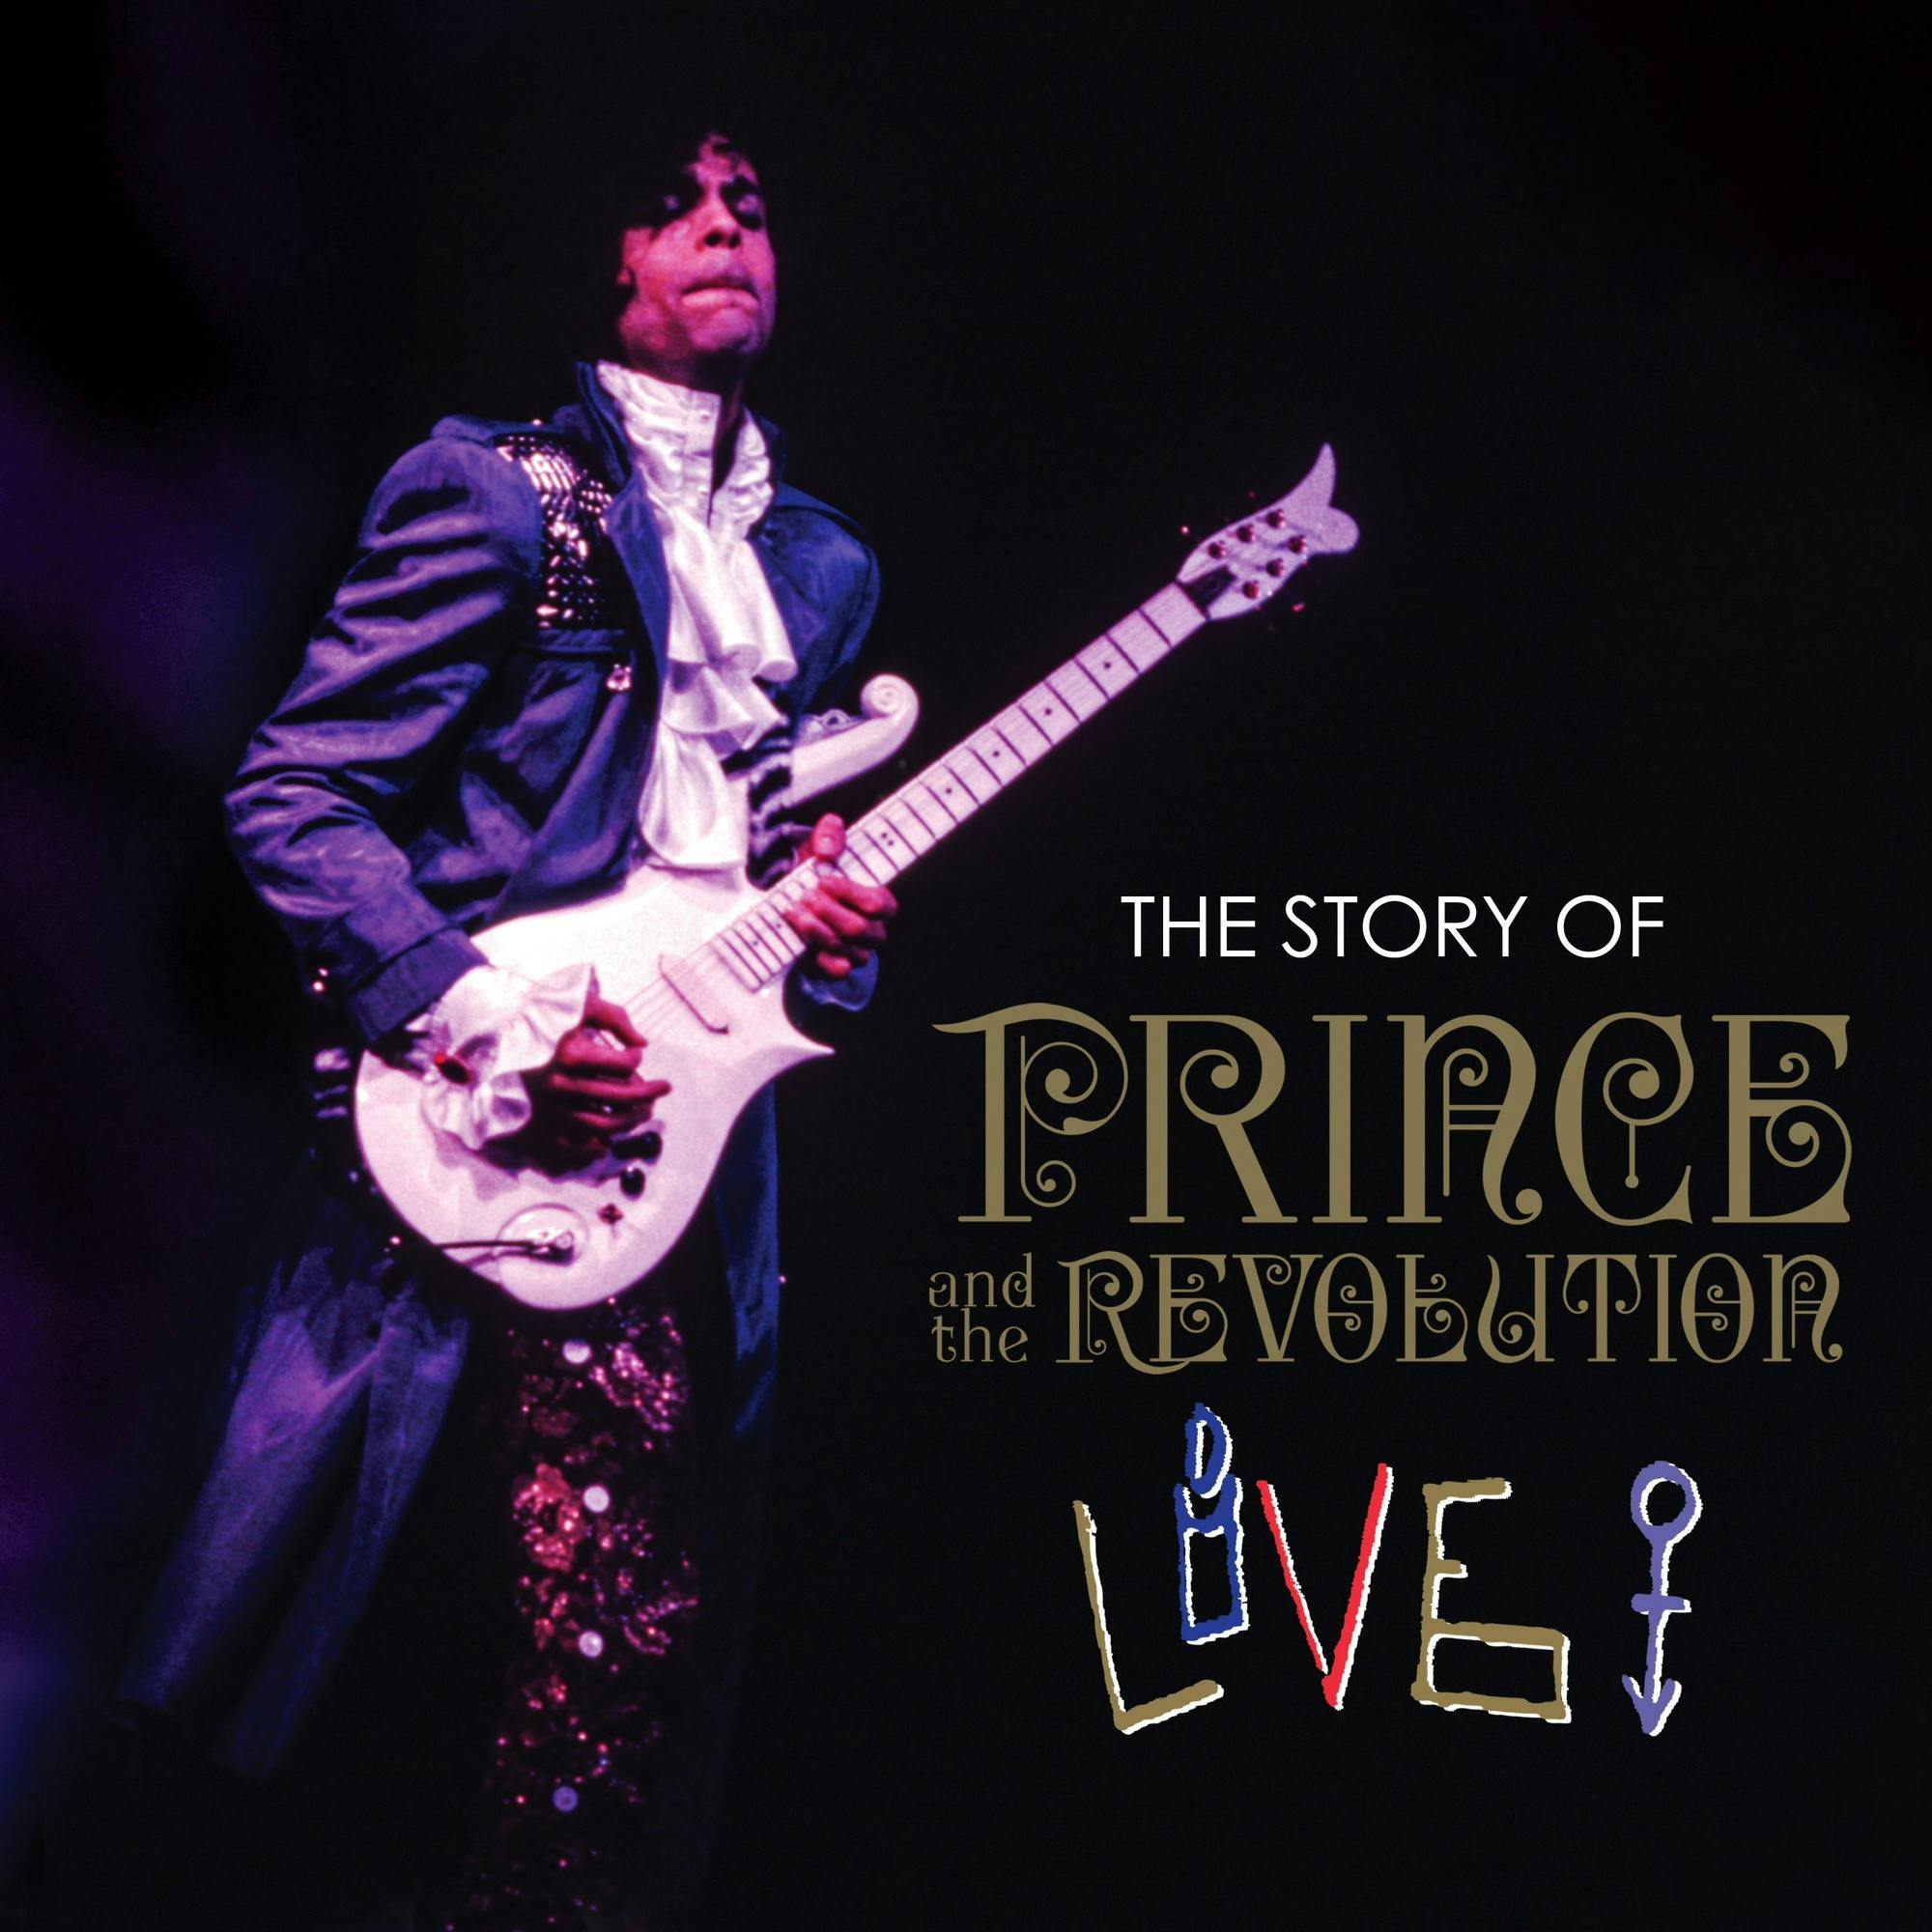 The Story of Prince and The Revolution: Live - Teaser